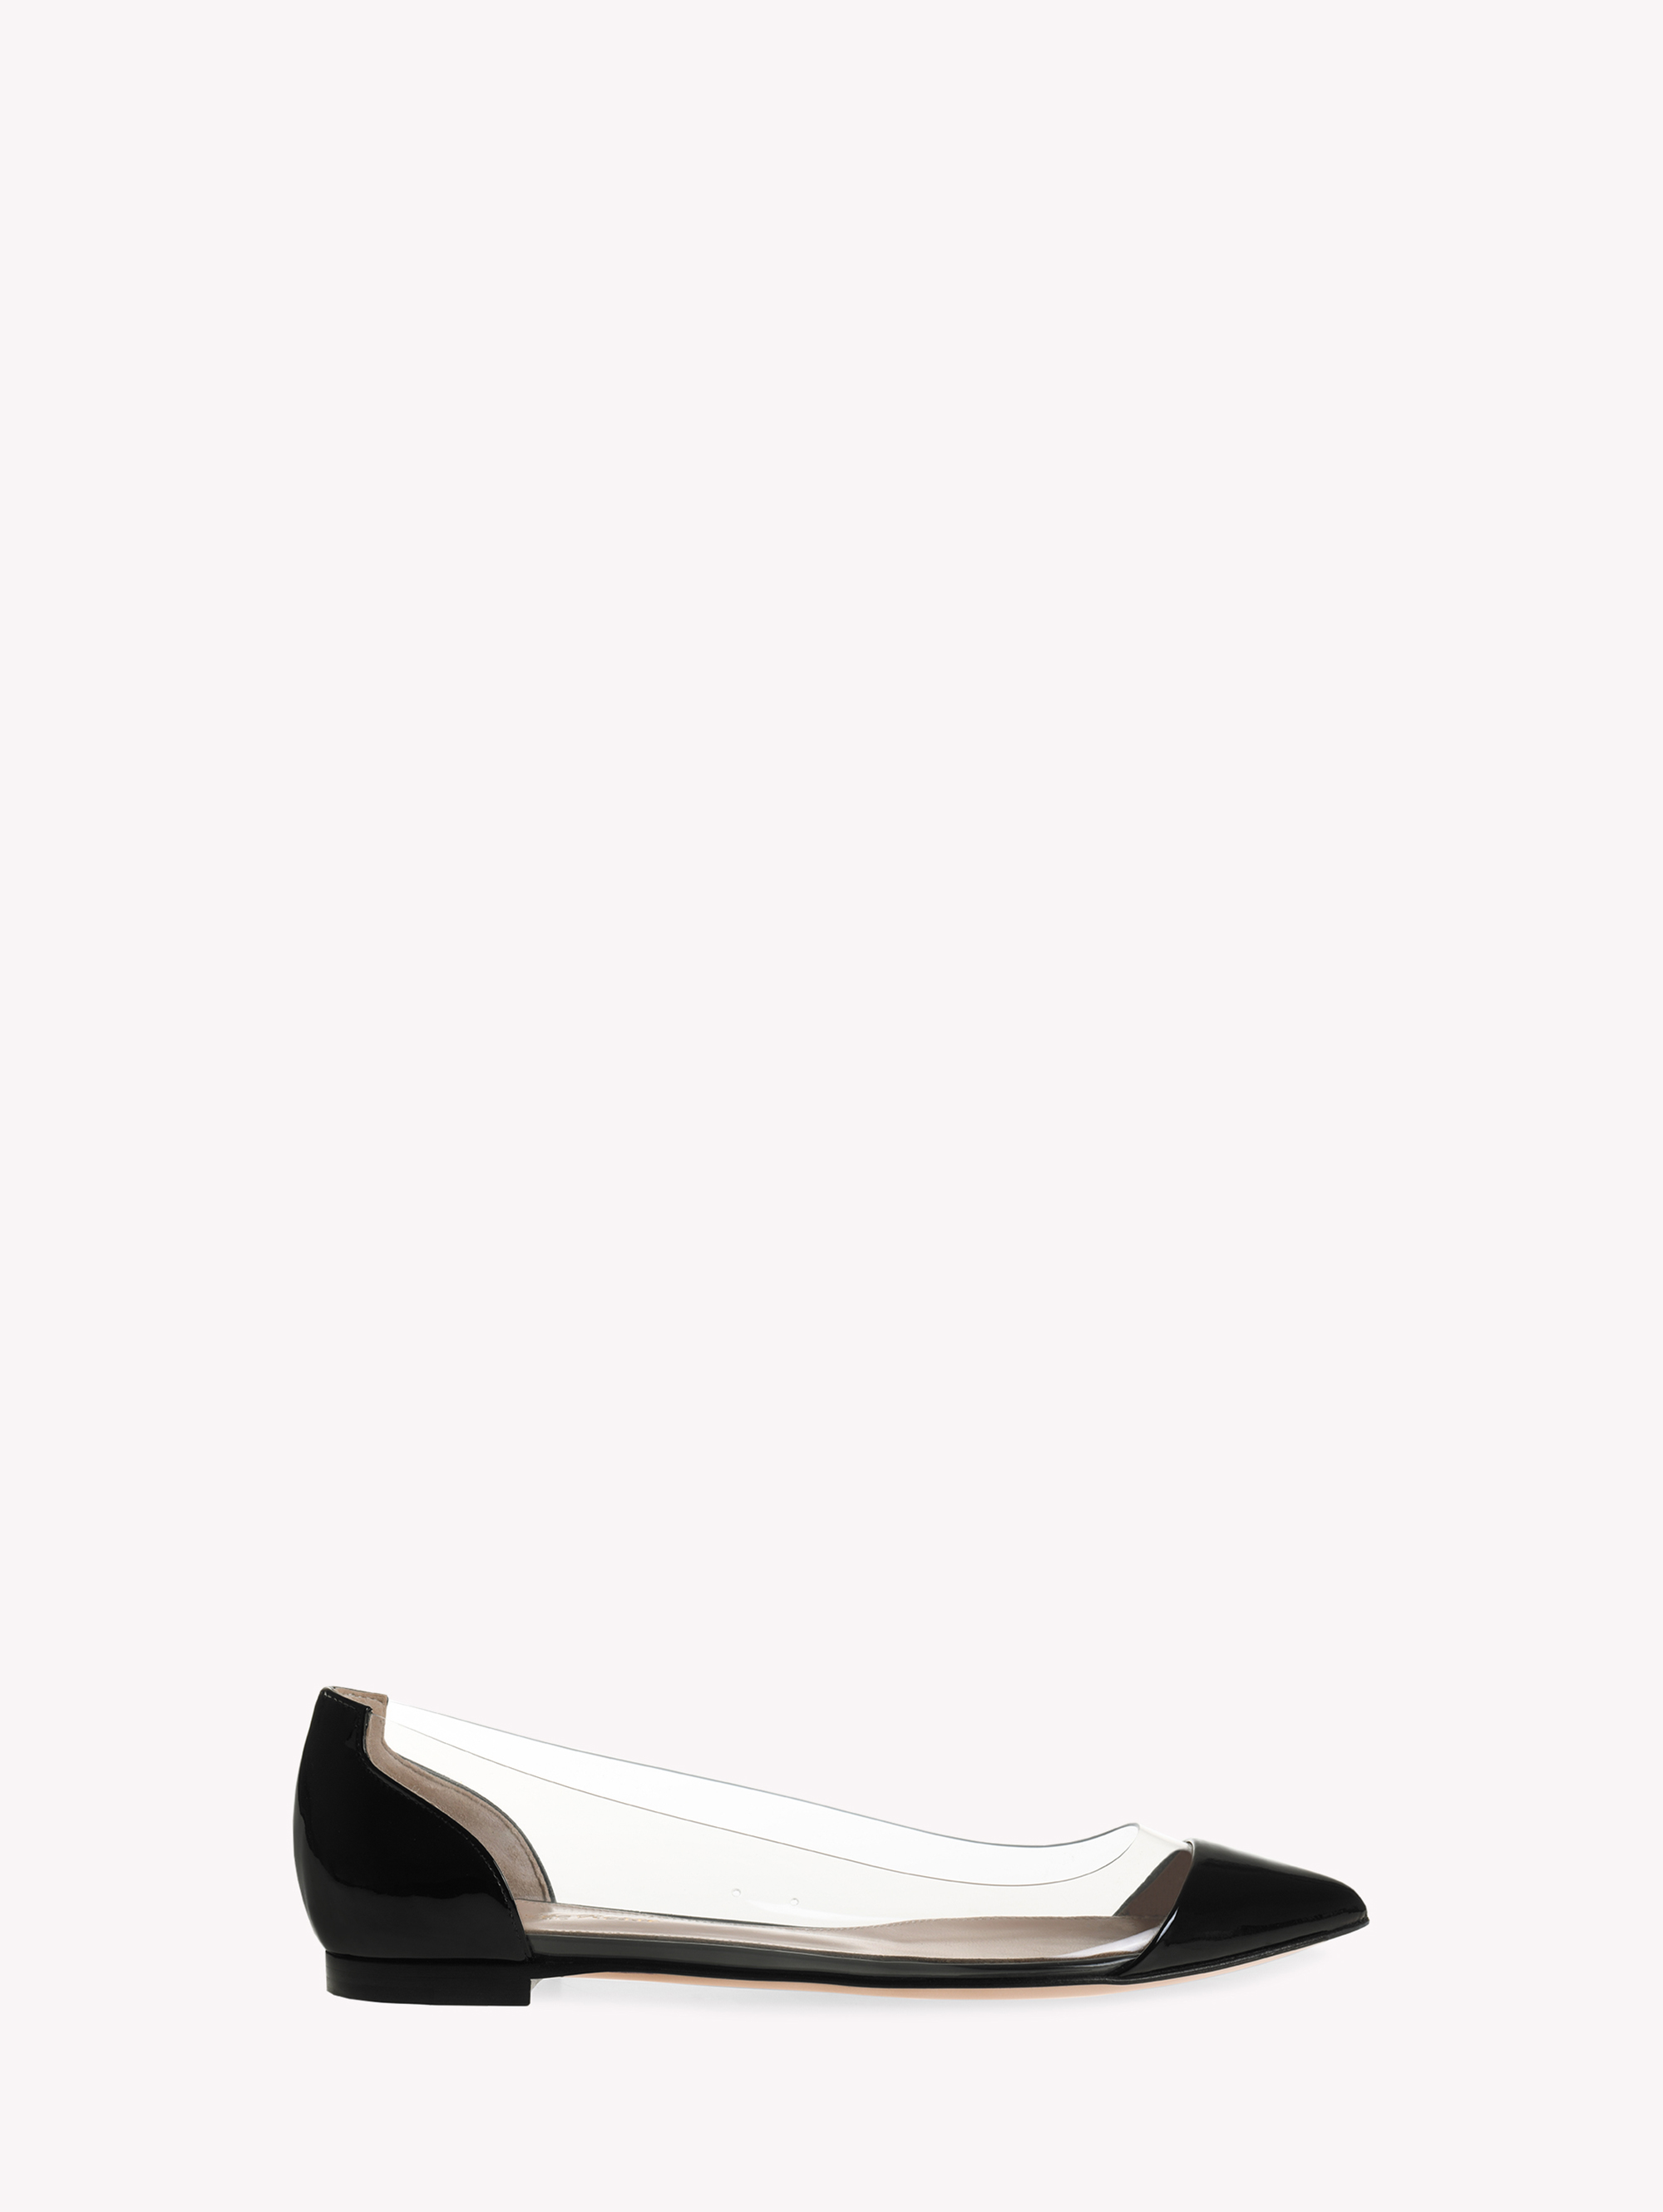 Buy PLEXI FLAT for N/A 0.0 | Gianvito Rossi Japan